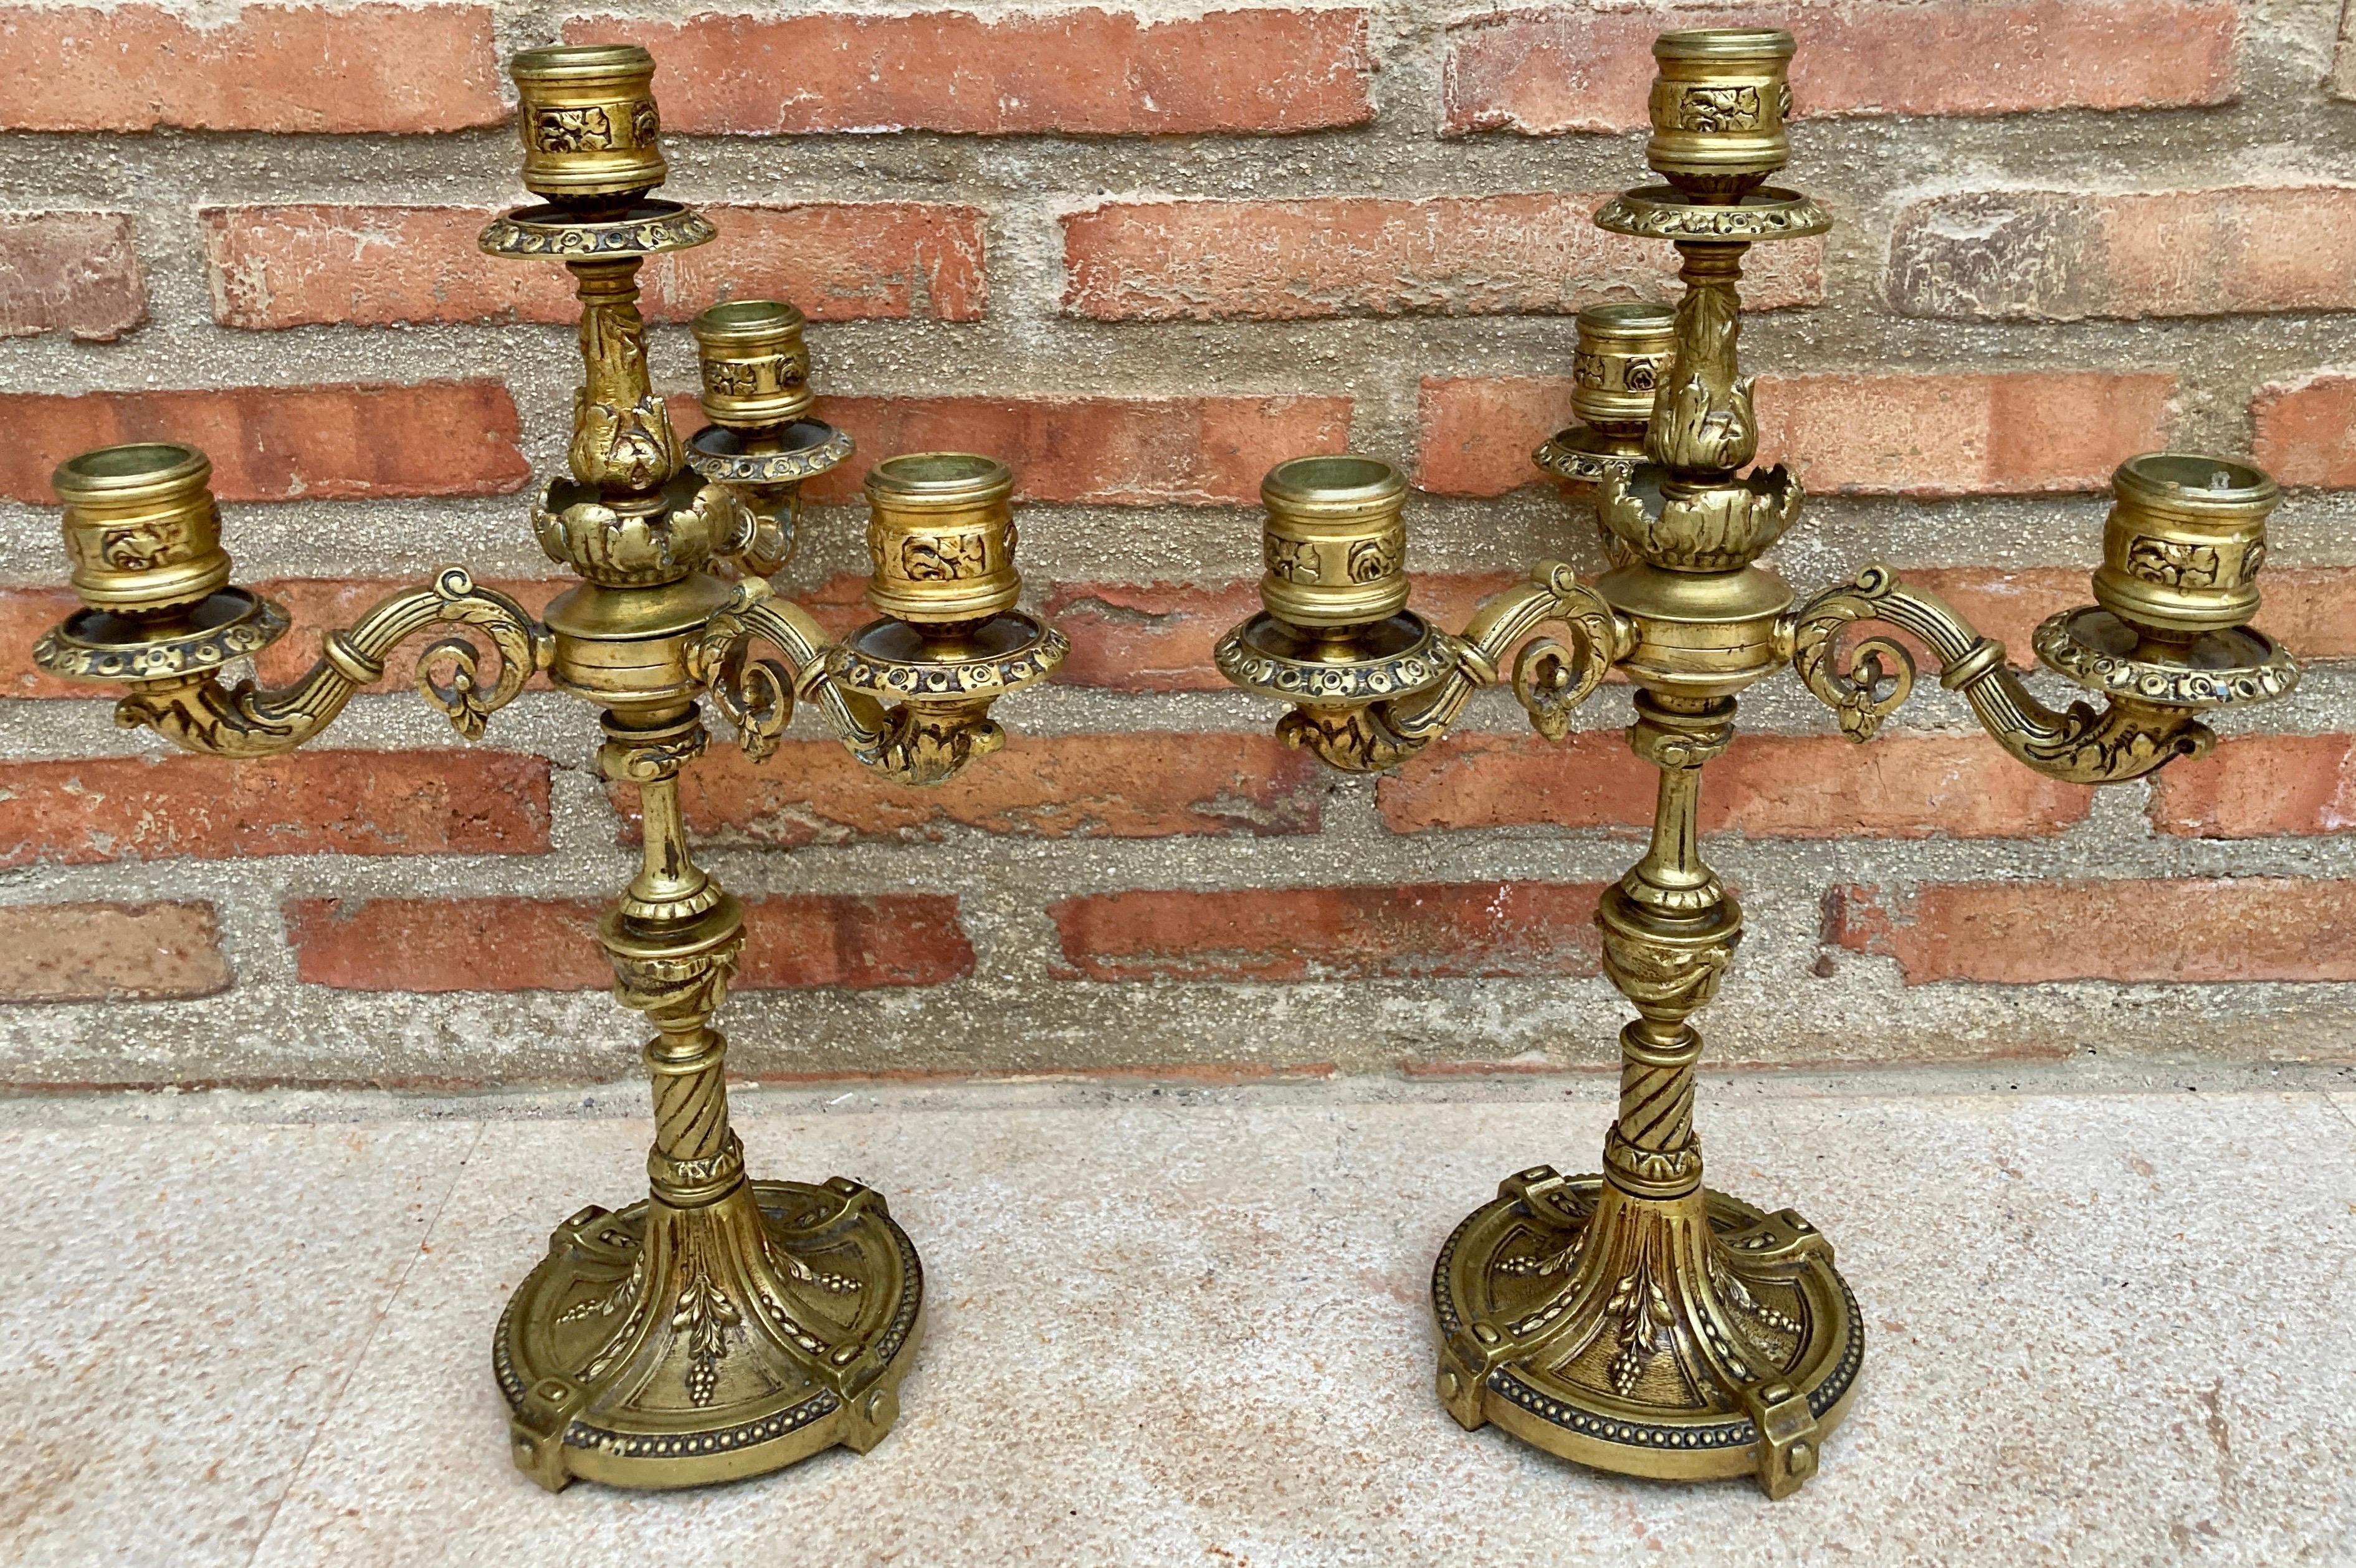 A pair of four-light gilt bronze Louis XVI style candelabra or table lamps.

Each one with a fluted shaft that supports the central light and emits four swept branches. They are not currently wired for electricity, they can be plugged in.